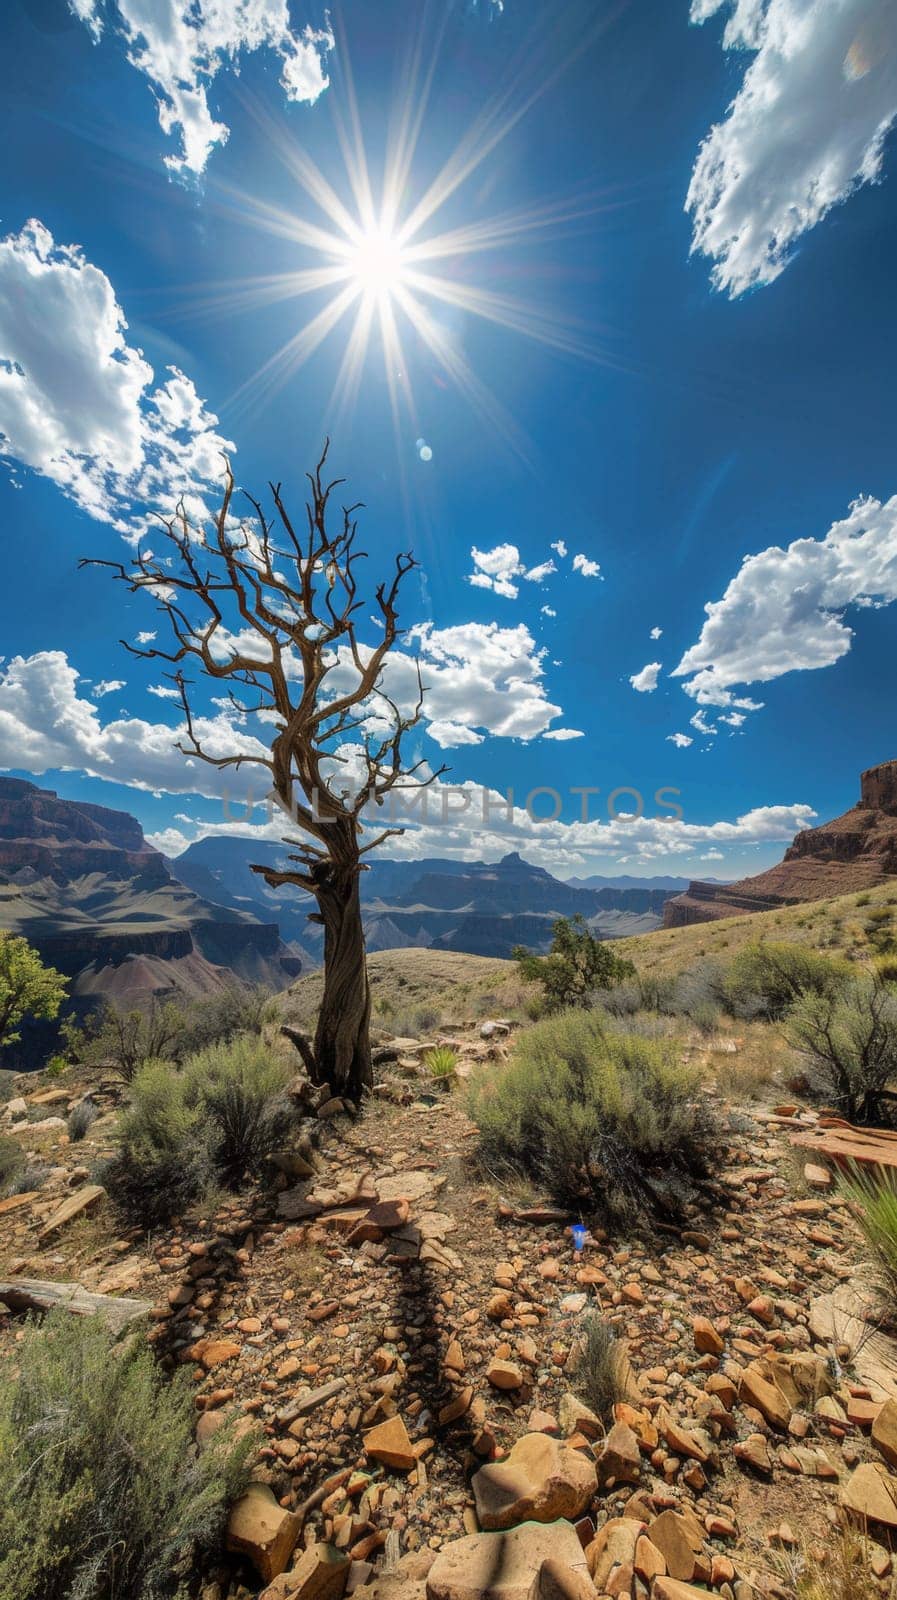 A lone tree in a desert area with the sun shining